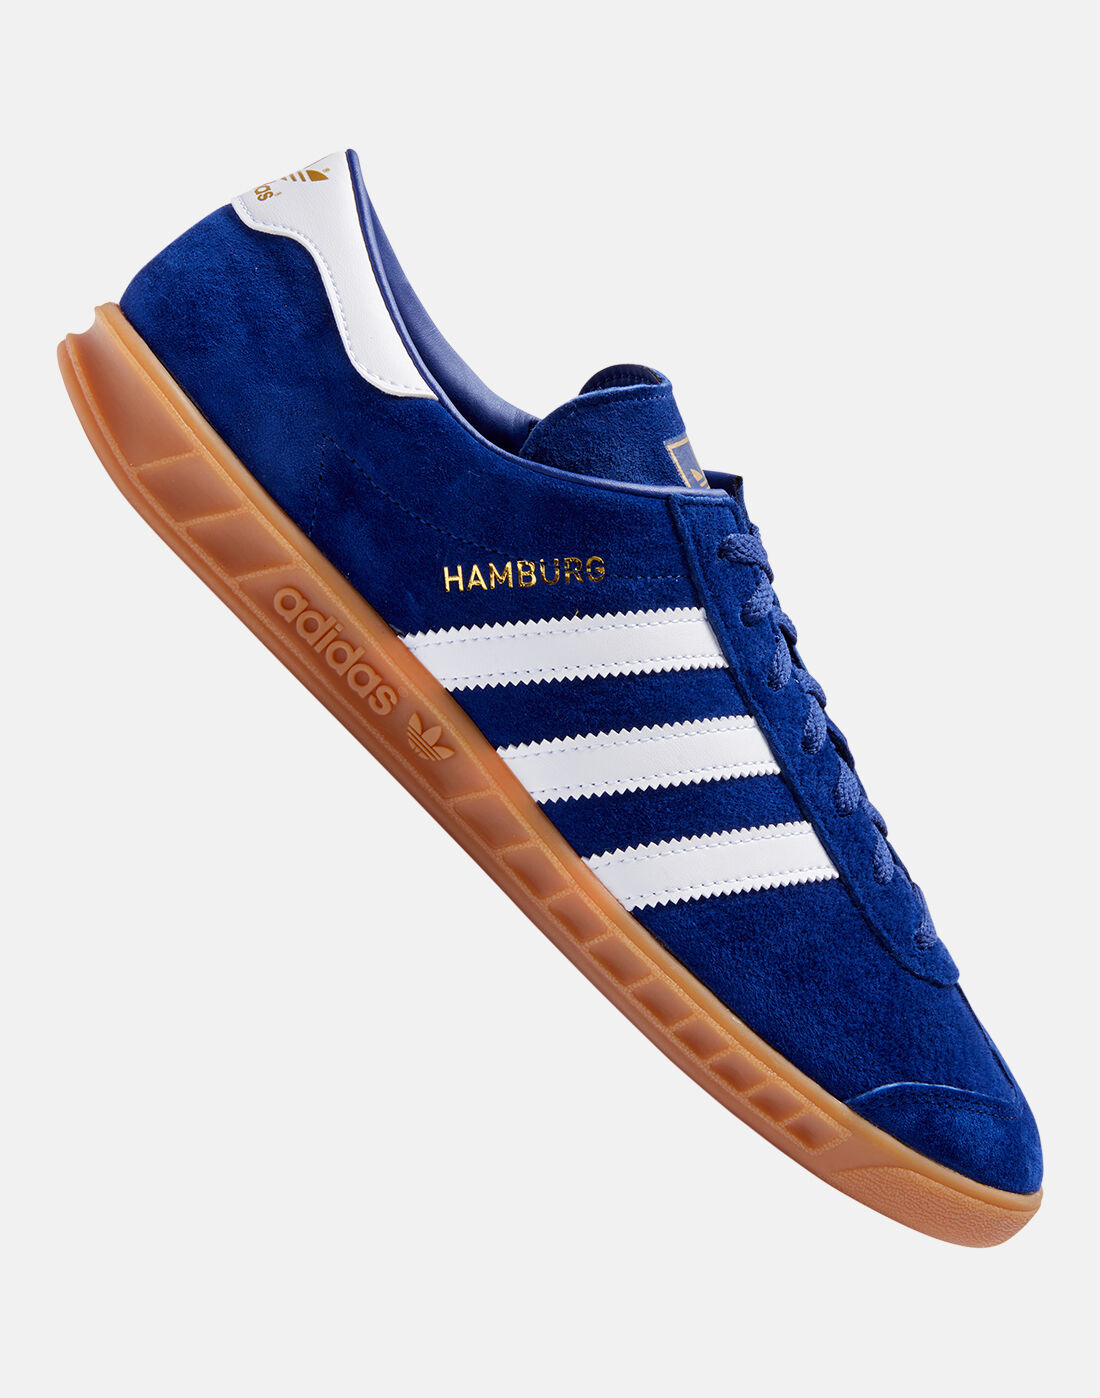 target adidas slides sale shoes 2017 | nmd variants in india and england  women fashion IE - adidas Originals Mens Hamburg - Blue